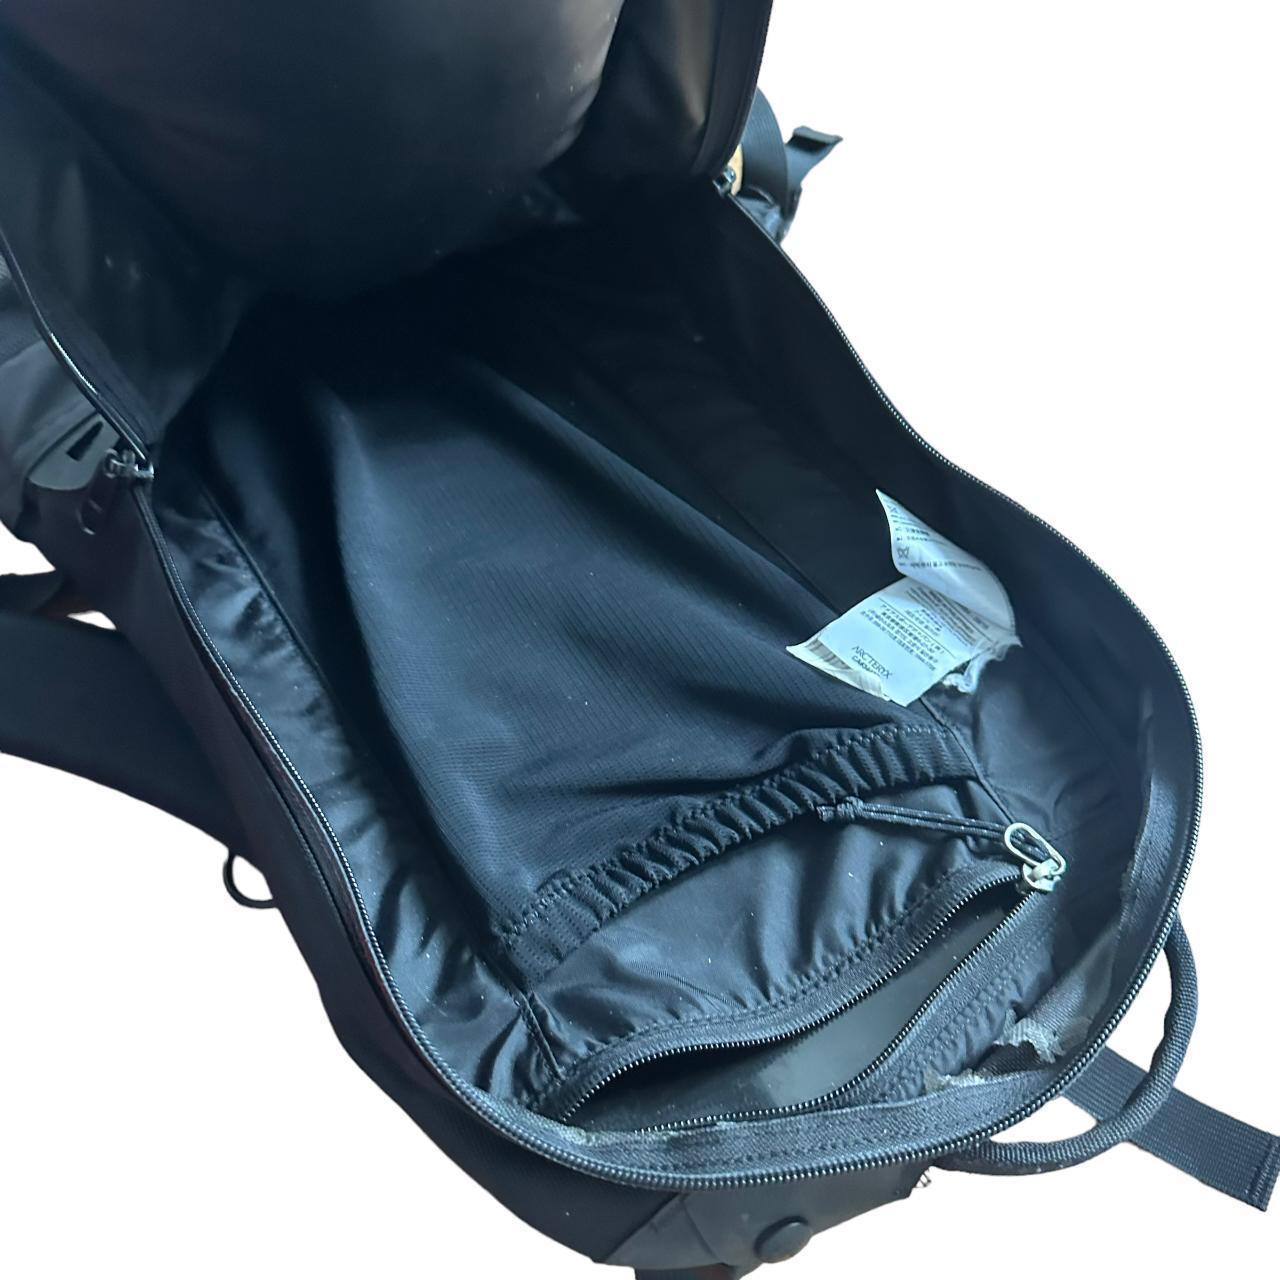 ARC'TERYX pink Backpack - Known Source